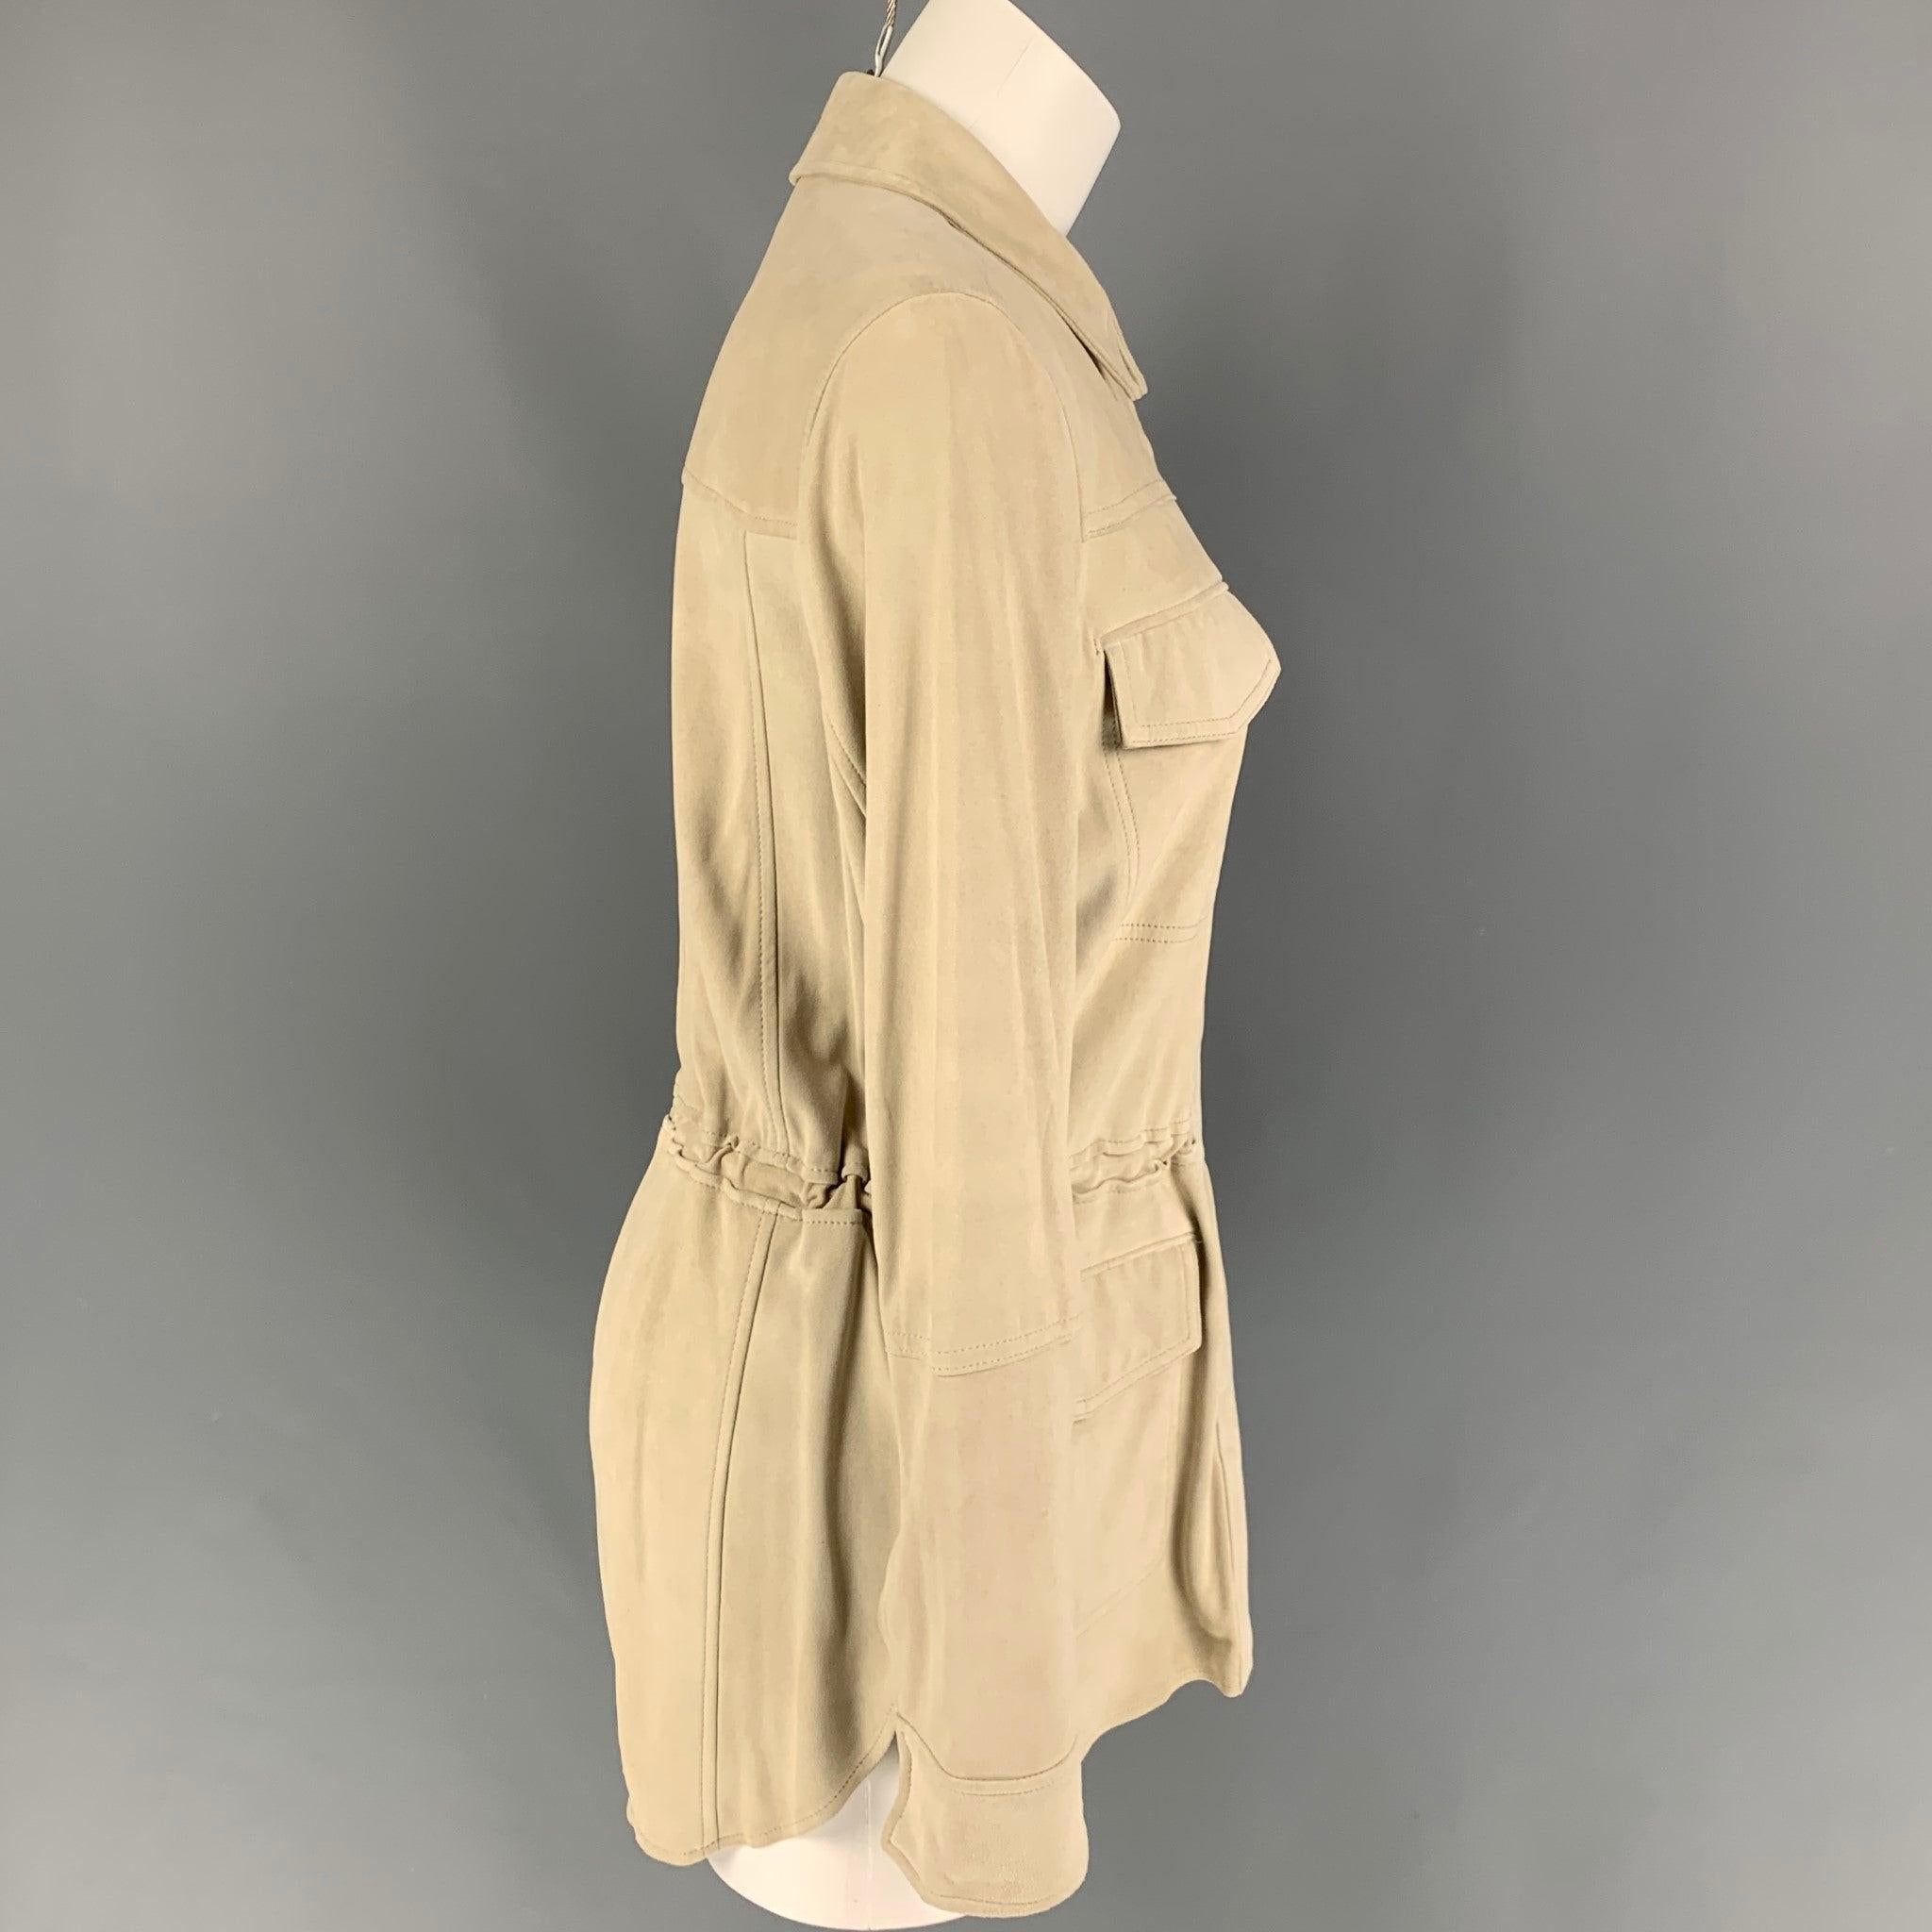 VINCE parka jacket comes in a beige suede featuring a waist drawstring, patch pockets, spread collar, and a snap button closure.
New With Tags. 

Marked:   S 

Measurements: 
 
Shoulder: 16 inches  Bust: 38 inches  Sleeve: 25.5 inches  Length: 31